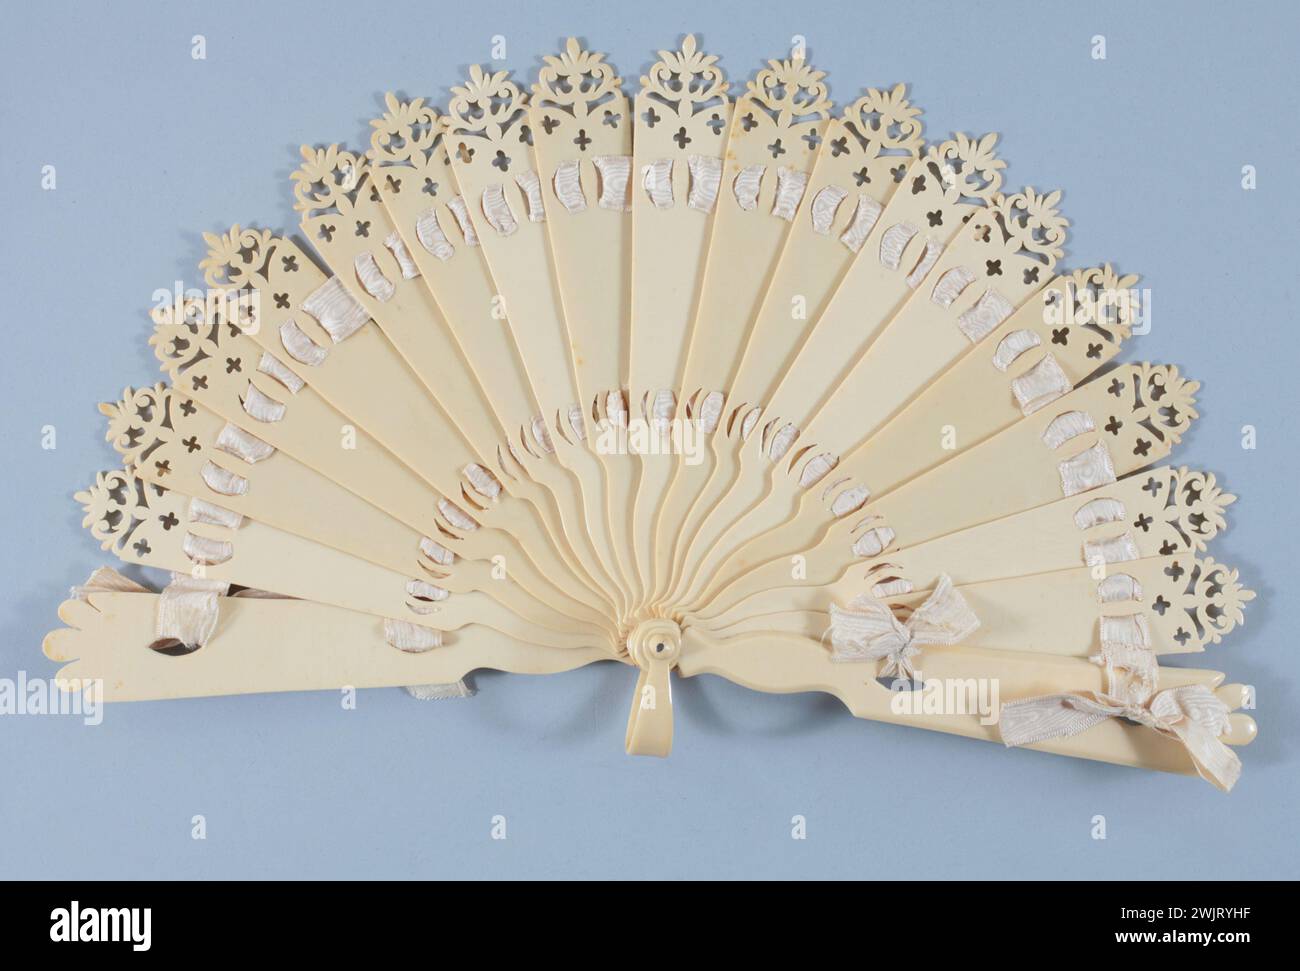 Broken fan, decor: high strands finer in pinnacle with ripple pattern, at the base 3 small crosses, 2 thicker plumes with trilobed patterns, 2 passages of moire ribbon ended by knots passing in eyelets fitted into the plumes . Gal1997.116.1 Celluloid, Moire Crème ribbon Stock Photo